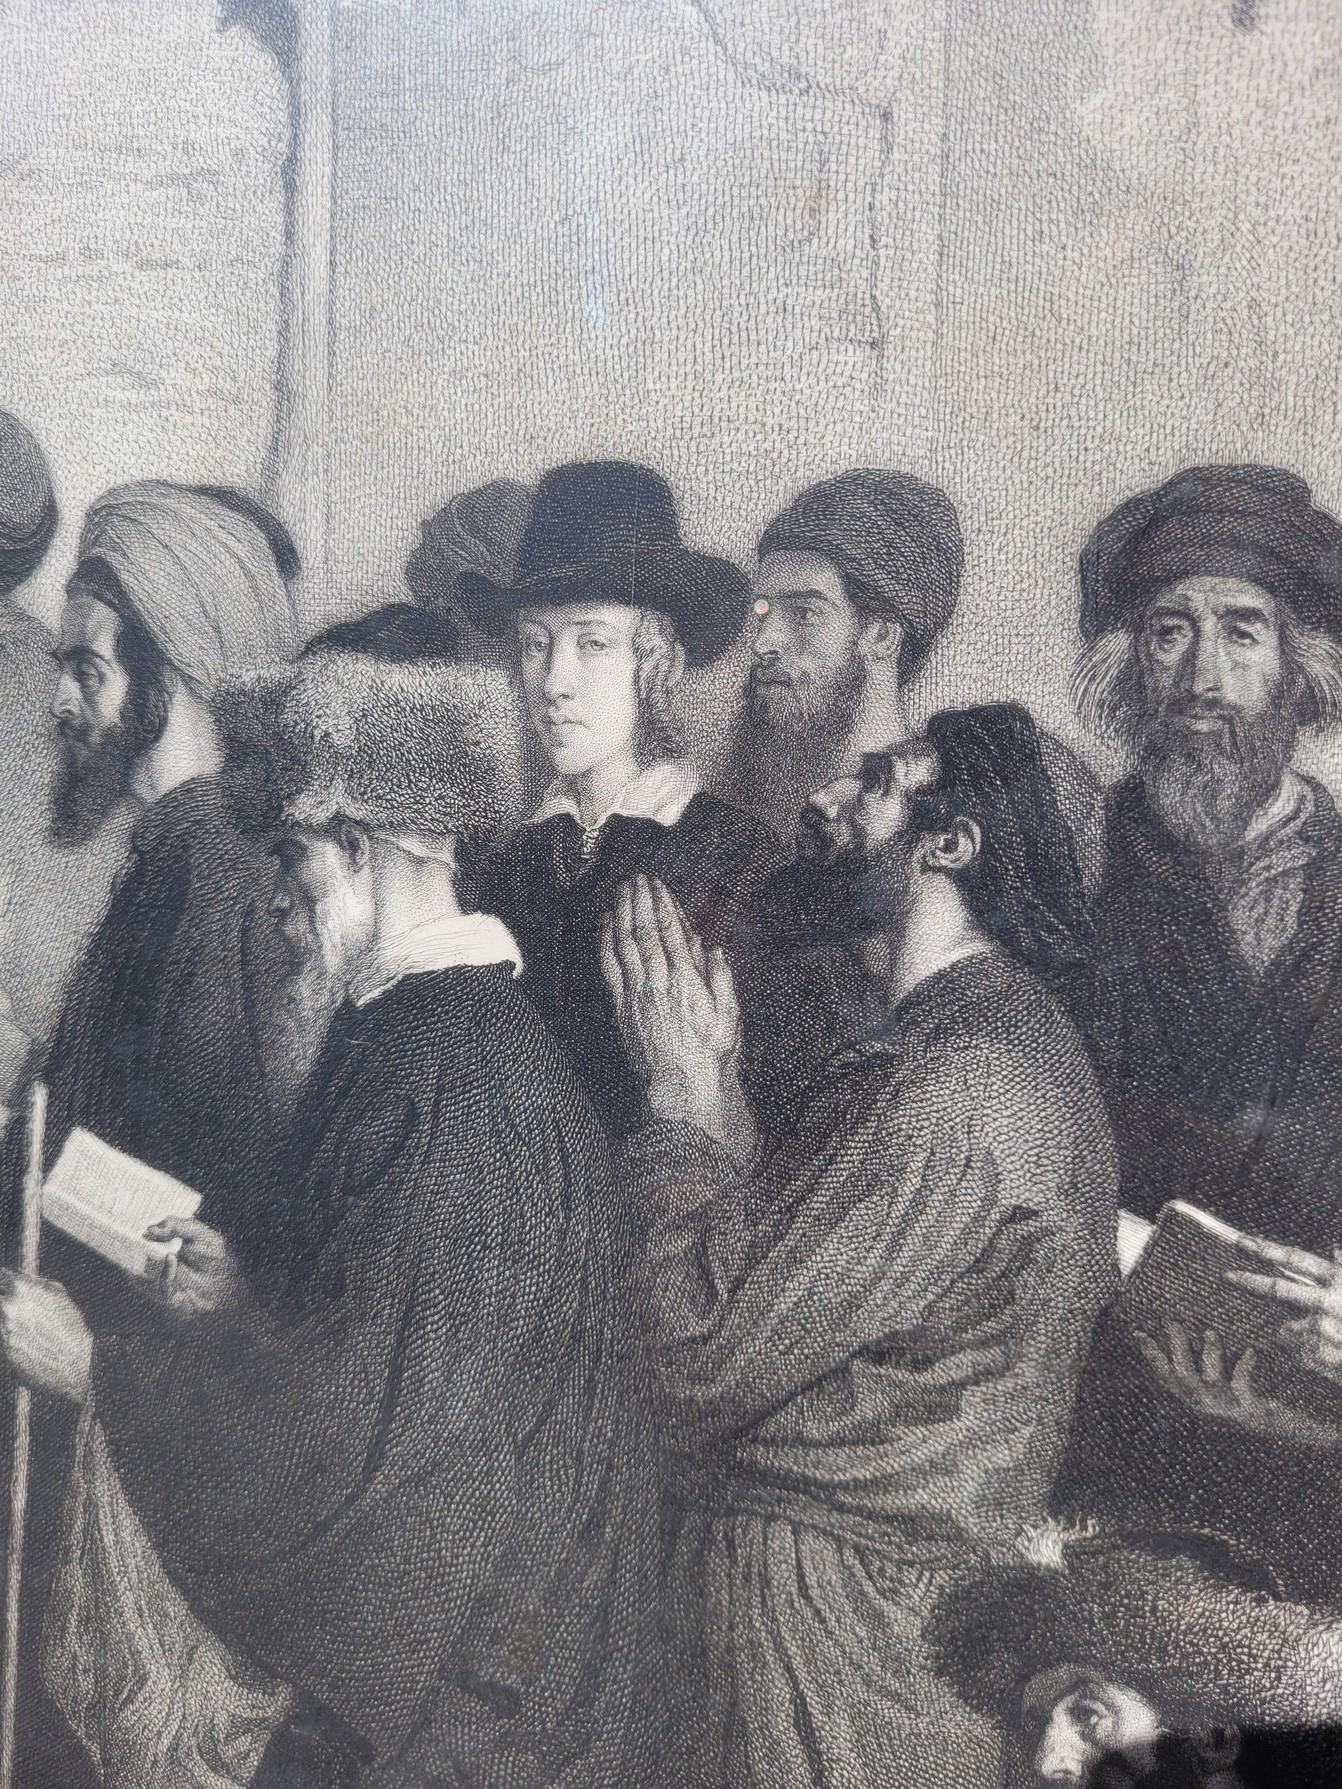 The Jews In Front Of Solomon's Wall, Framed Engraving, Alexandre Bida, 19th Cent For Sale 2